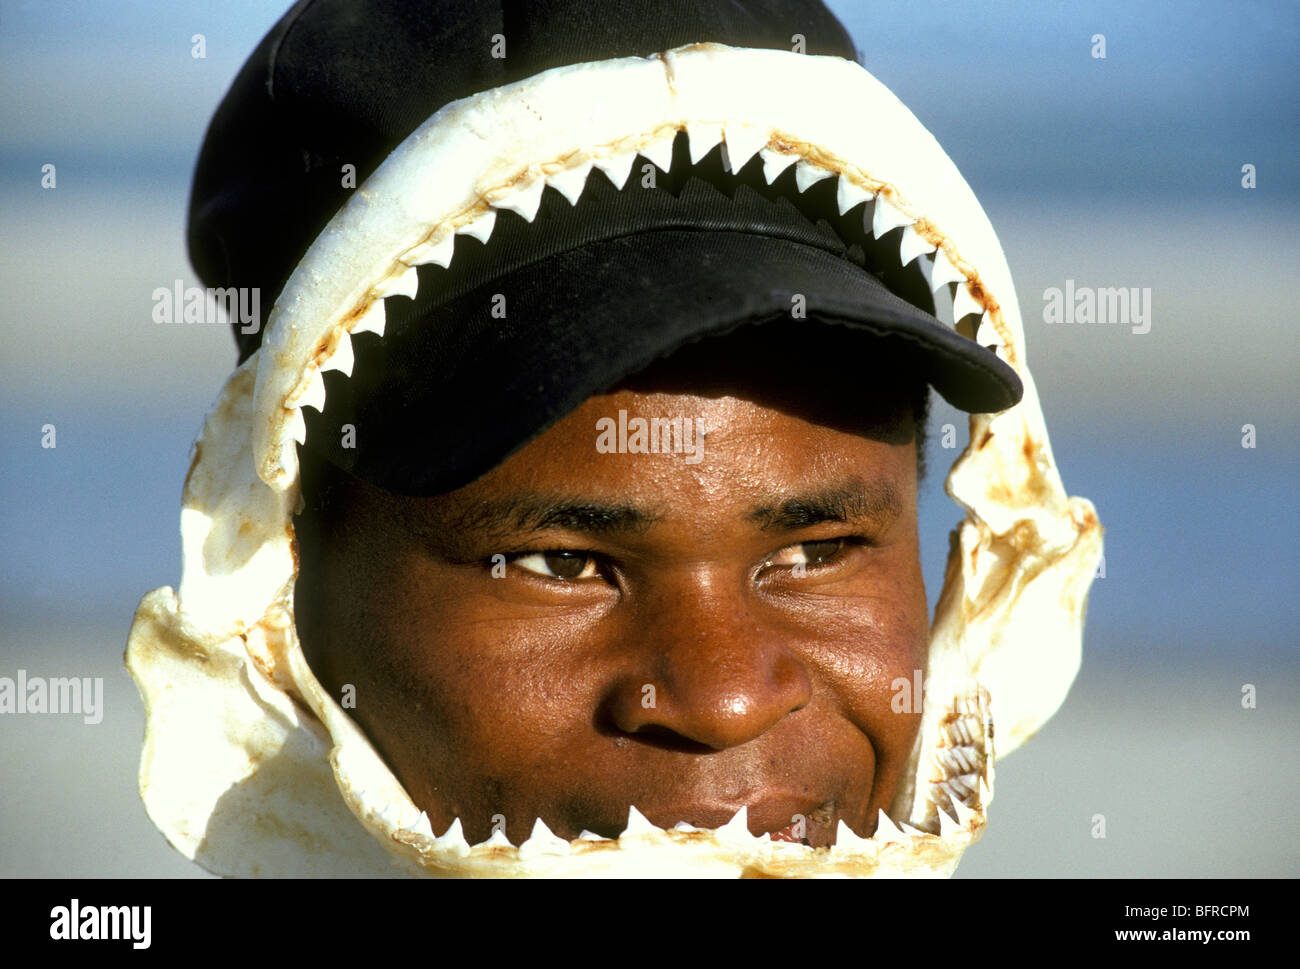 Anwar Alexander with sharks jaw draped over his face for sale to tourists Stock Photo